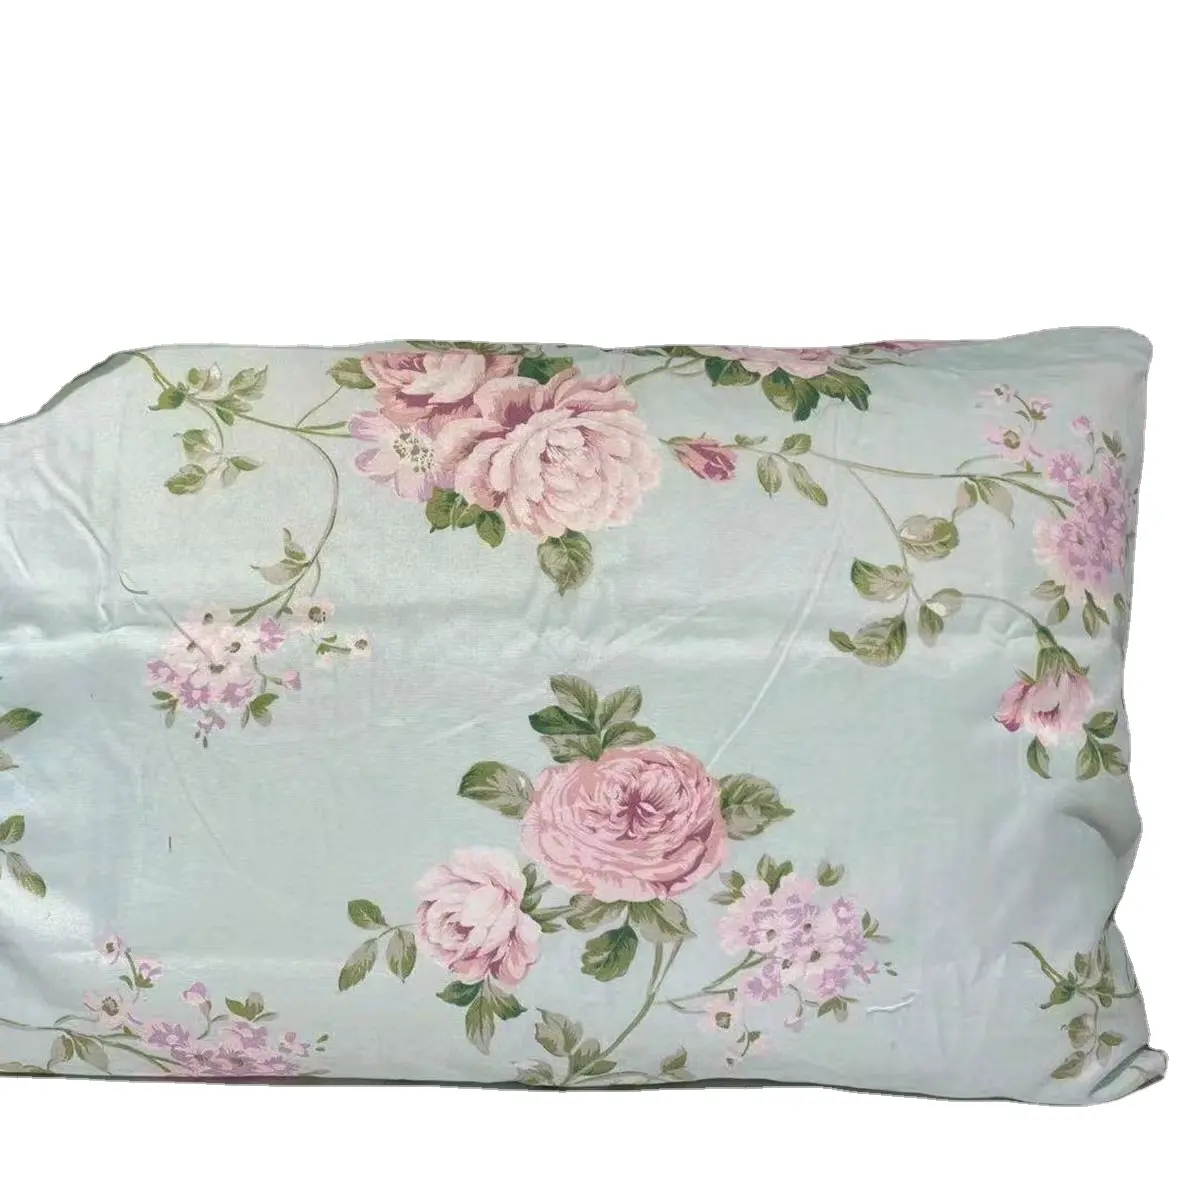 very cheap price stock of polyester pillowcase supermarket promotional item